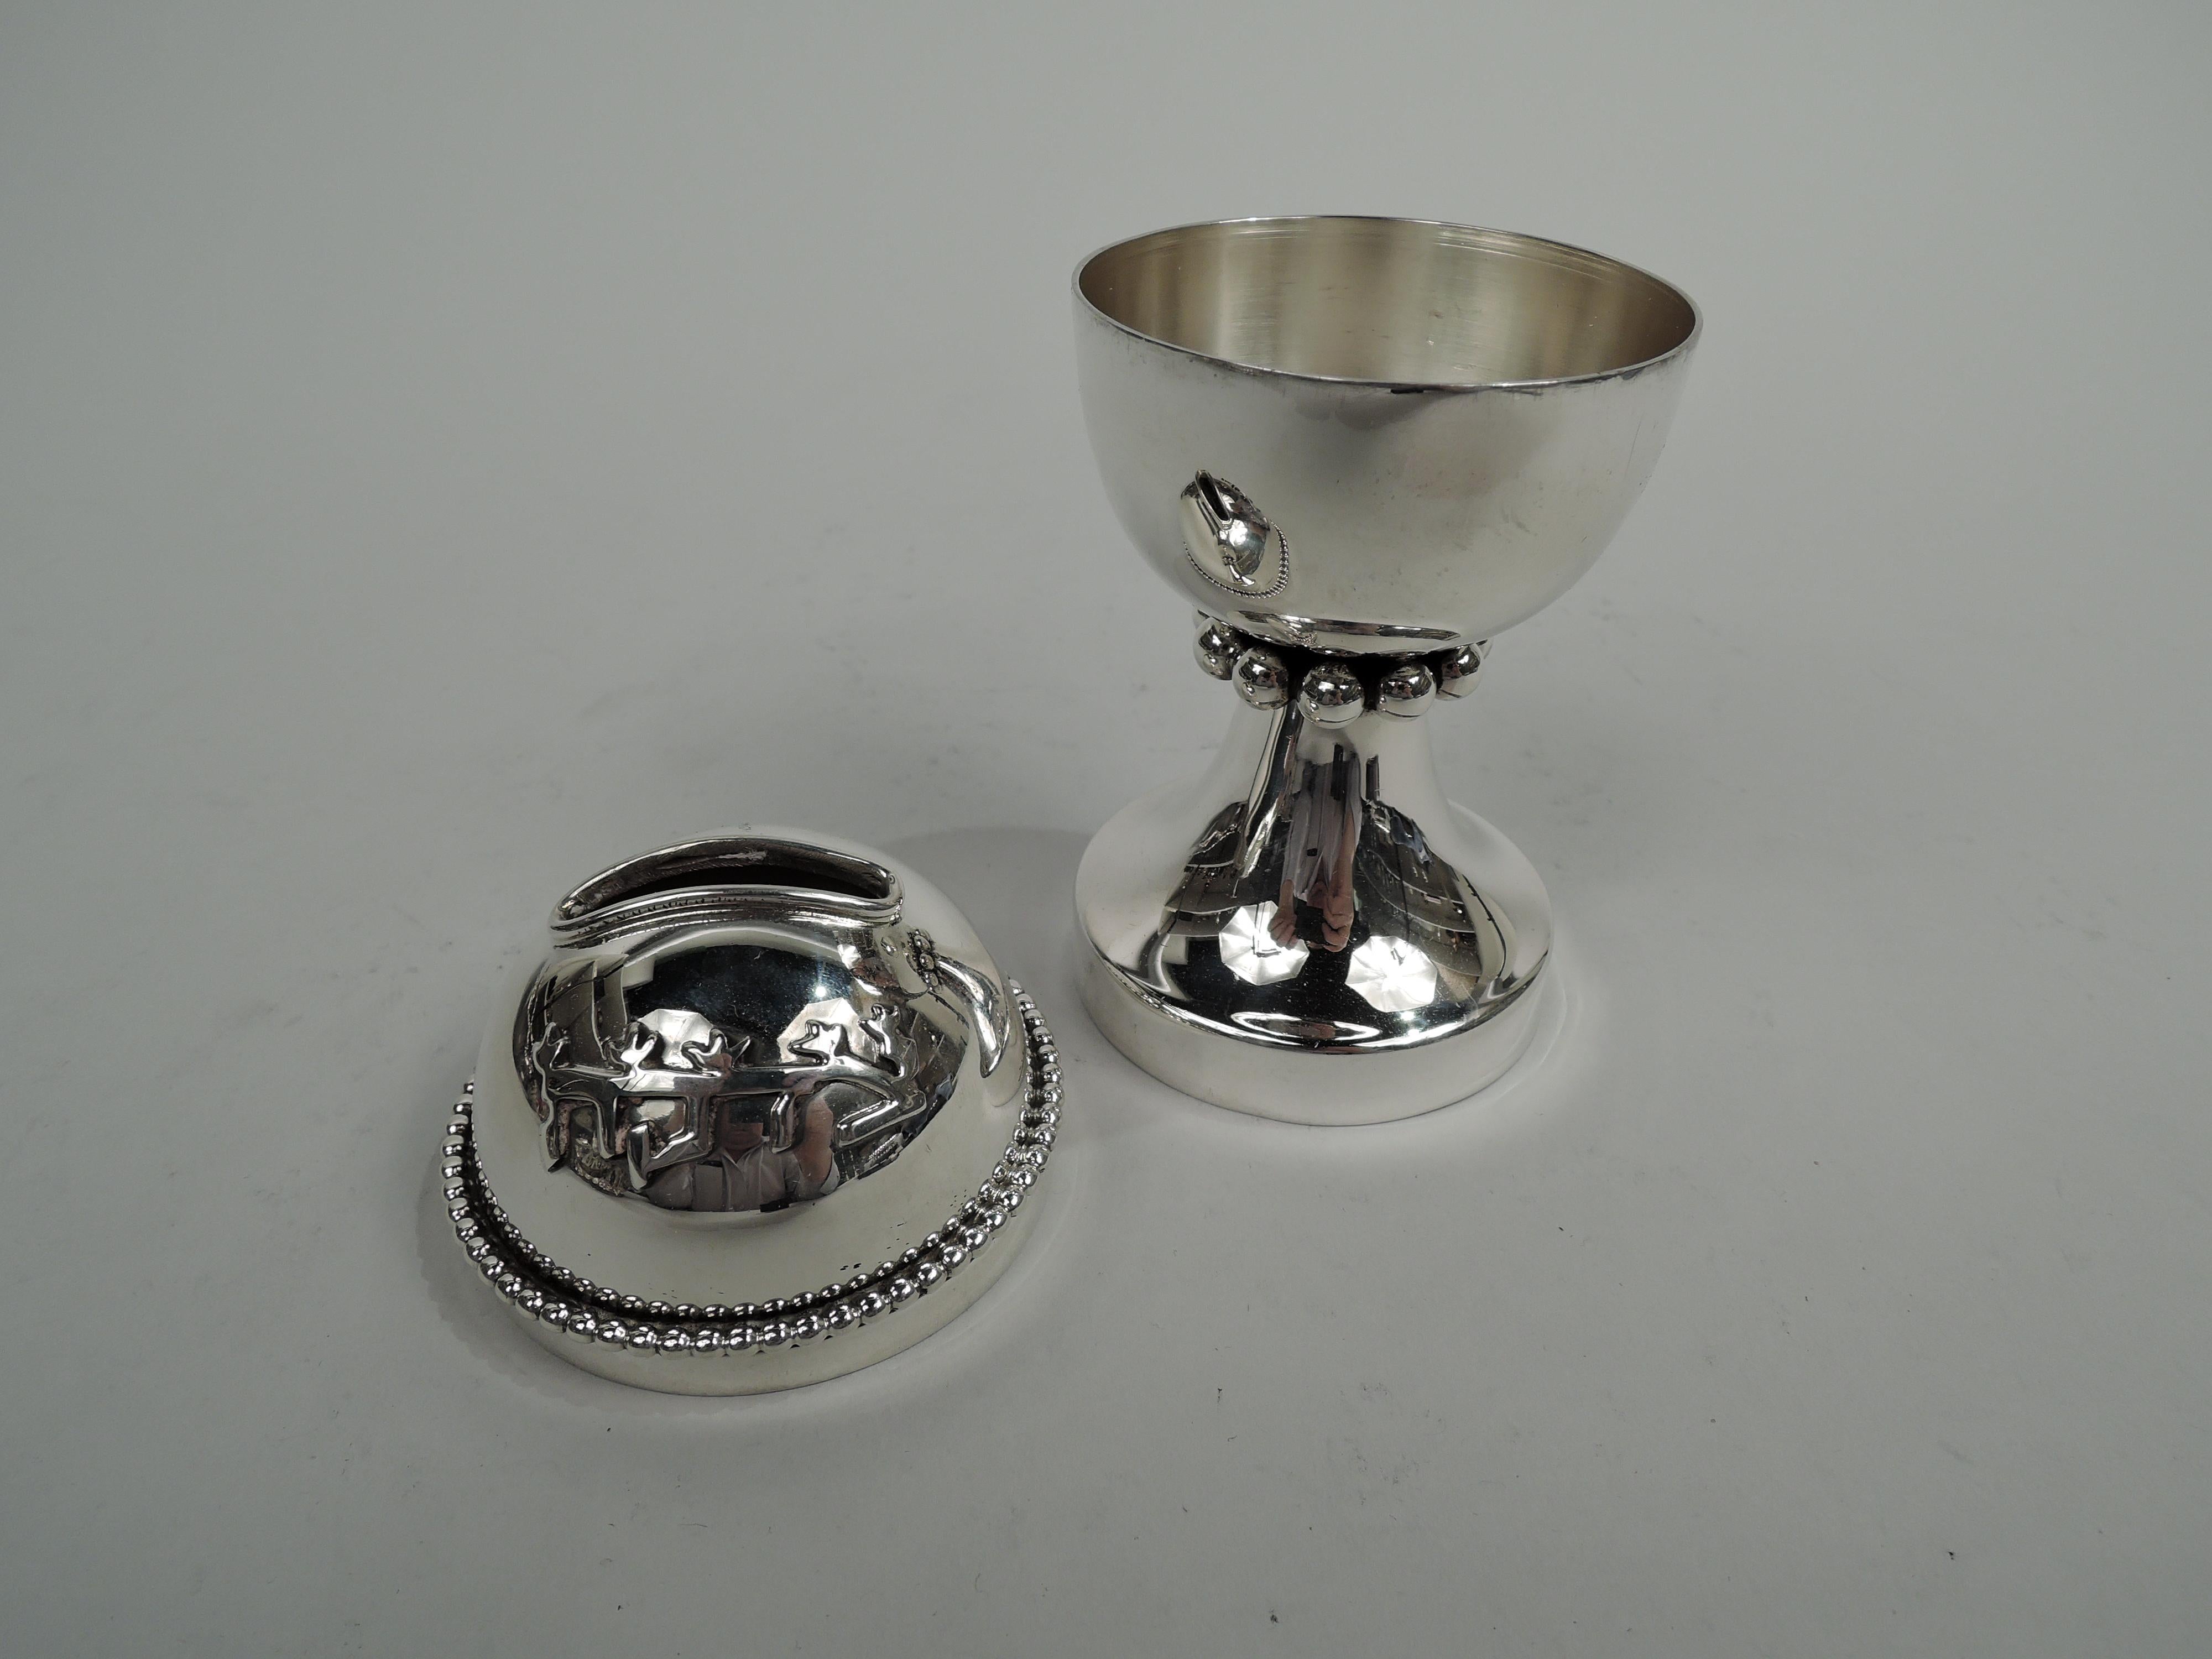 Modern sterling silver tzedakah box. Globular bowl with wide slot for inserting the big coins; raised and round foot. Beading. Applied Hebrew letters. Marked “925 / Israel / Ber”. Weight: 5 troy ounces.